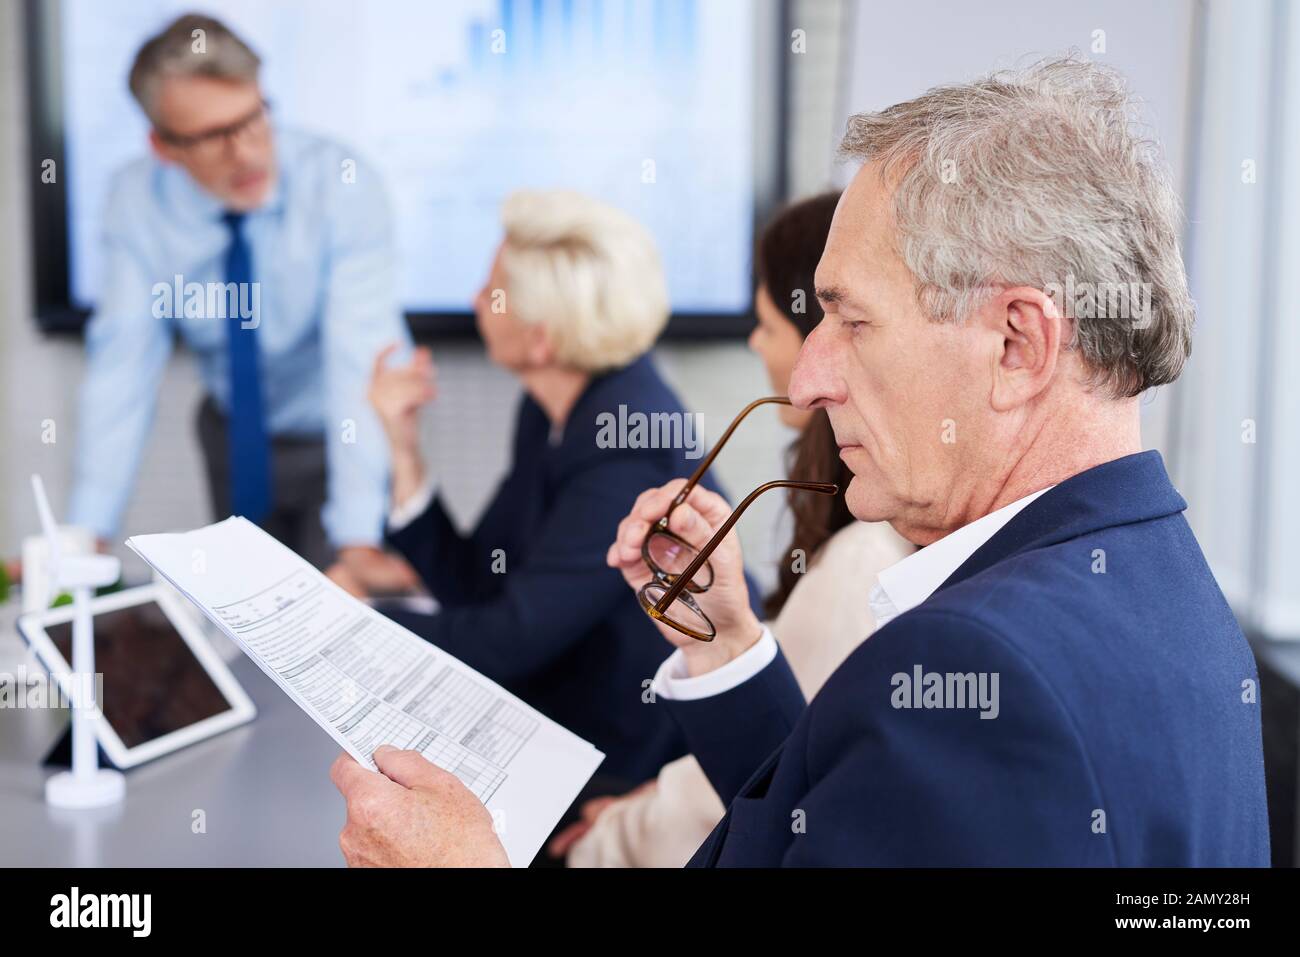 Business person reading important documents Stock Photo